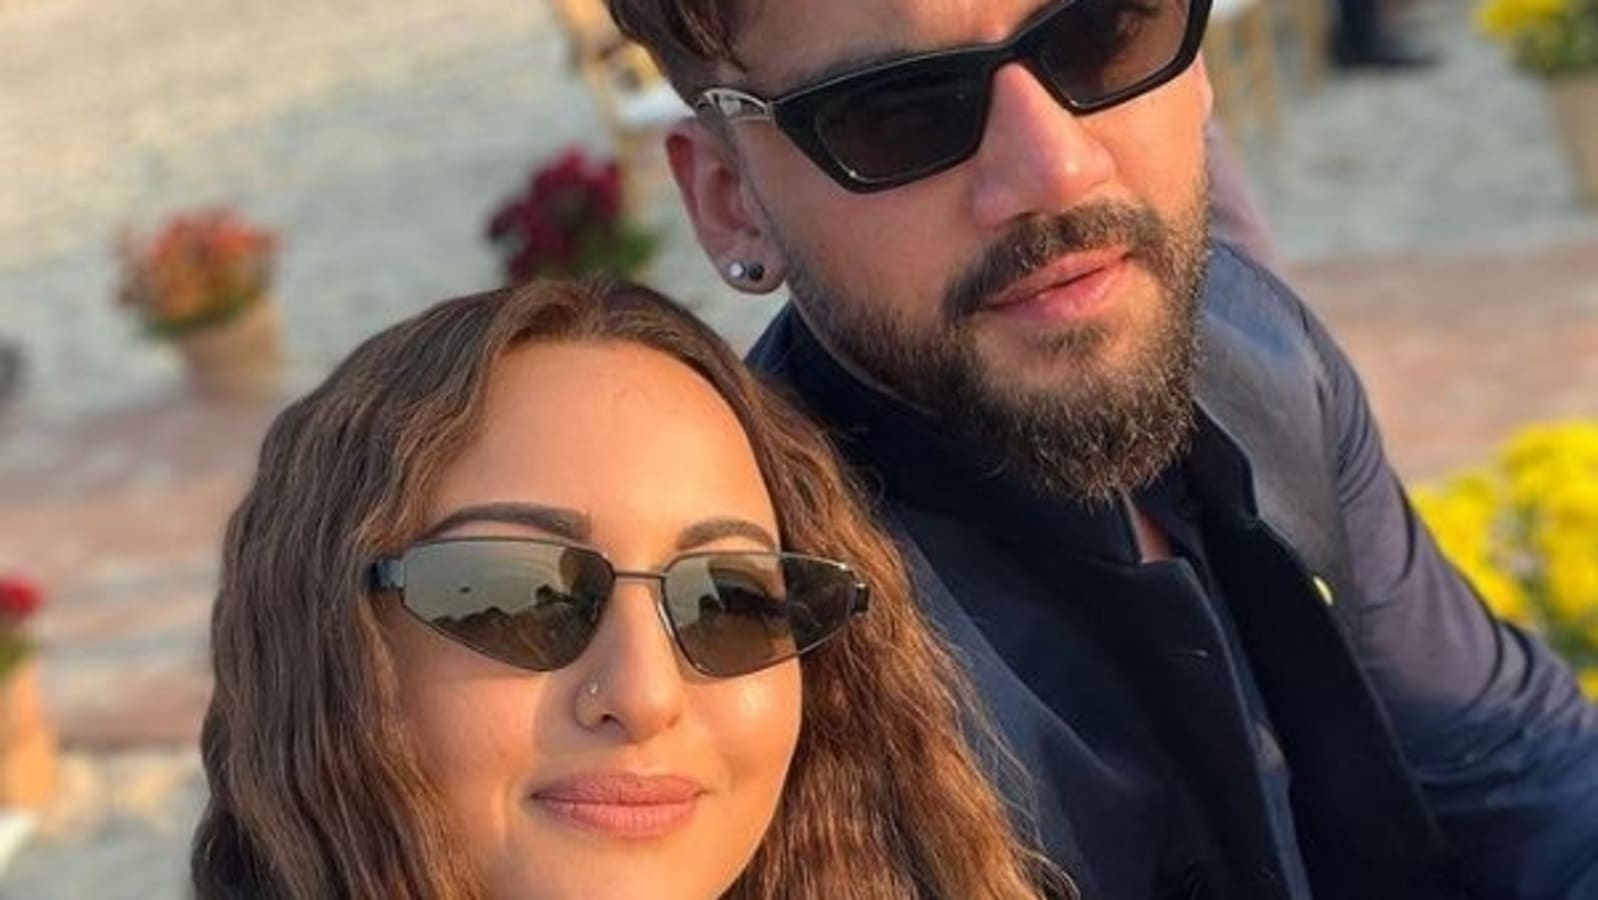 Sonakshi Rape Xxx - Sonakshi Sinha and Zaheer Iqbal say 'I Love You' to each other. Watch video  | Bollywood - Hindustan Times